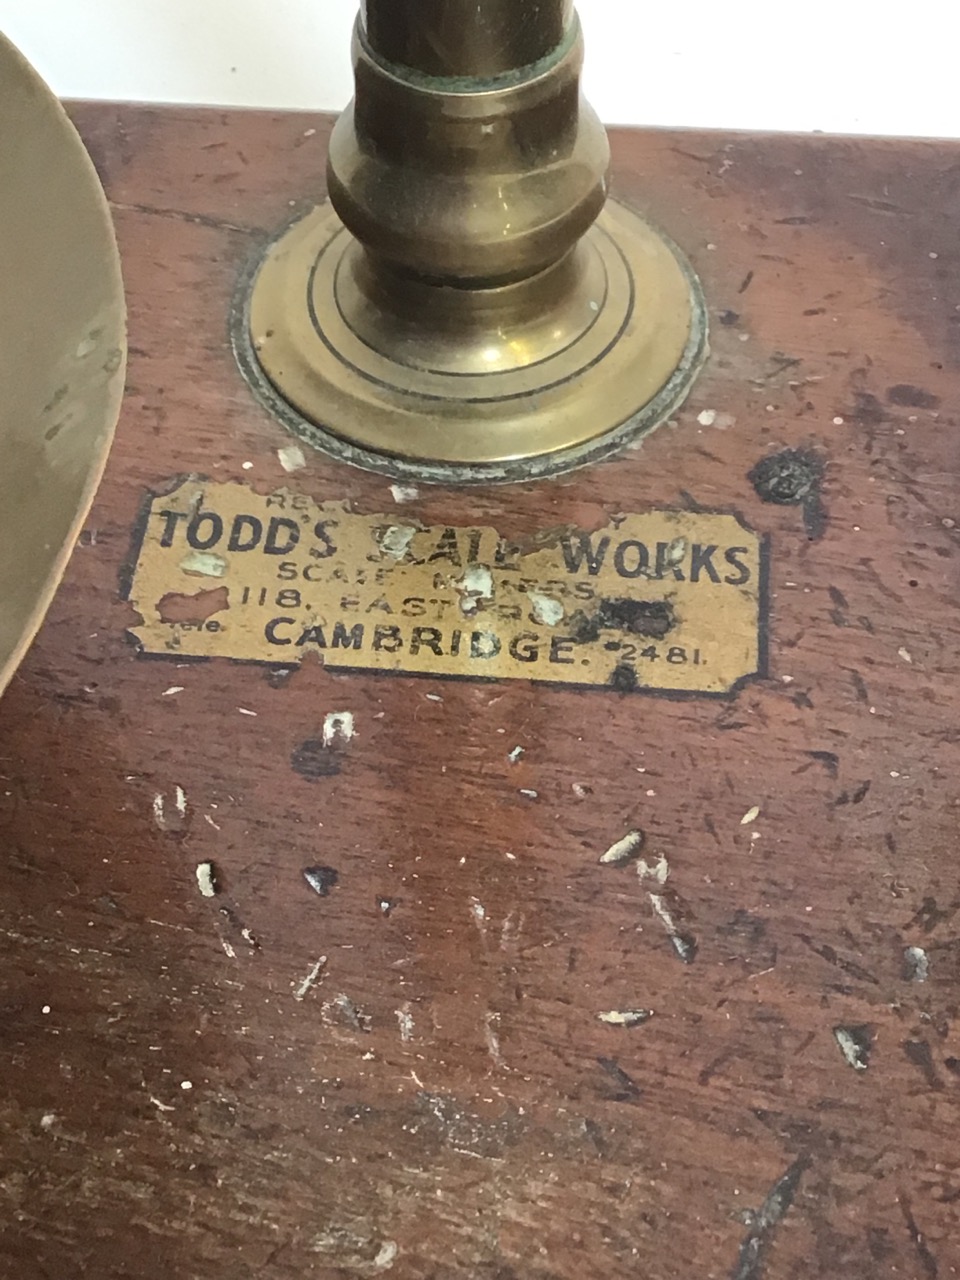 A set of brass post office scales. With original Toddâ€™s scale works label. H:43cm - Bild 2 aus 6